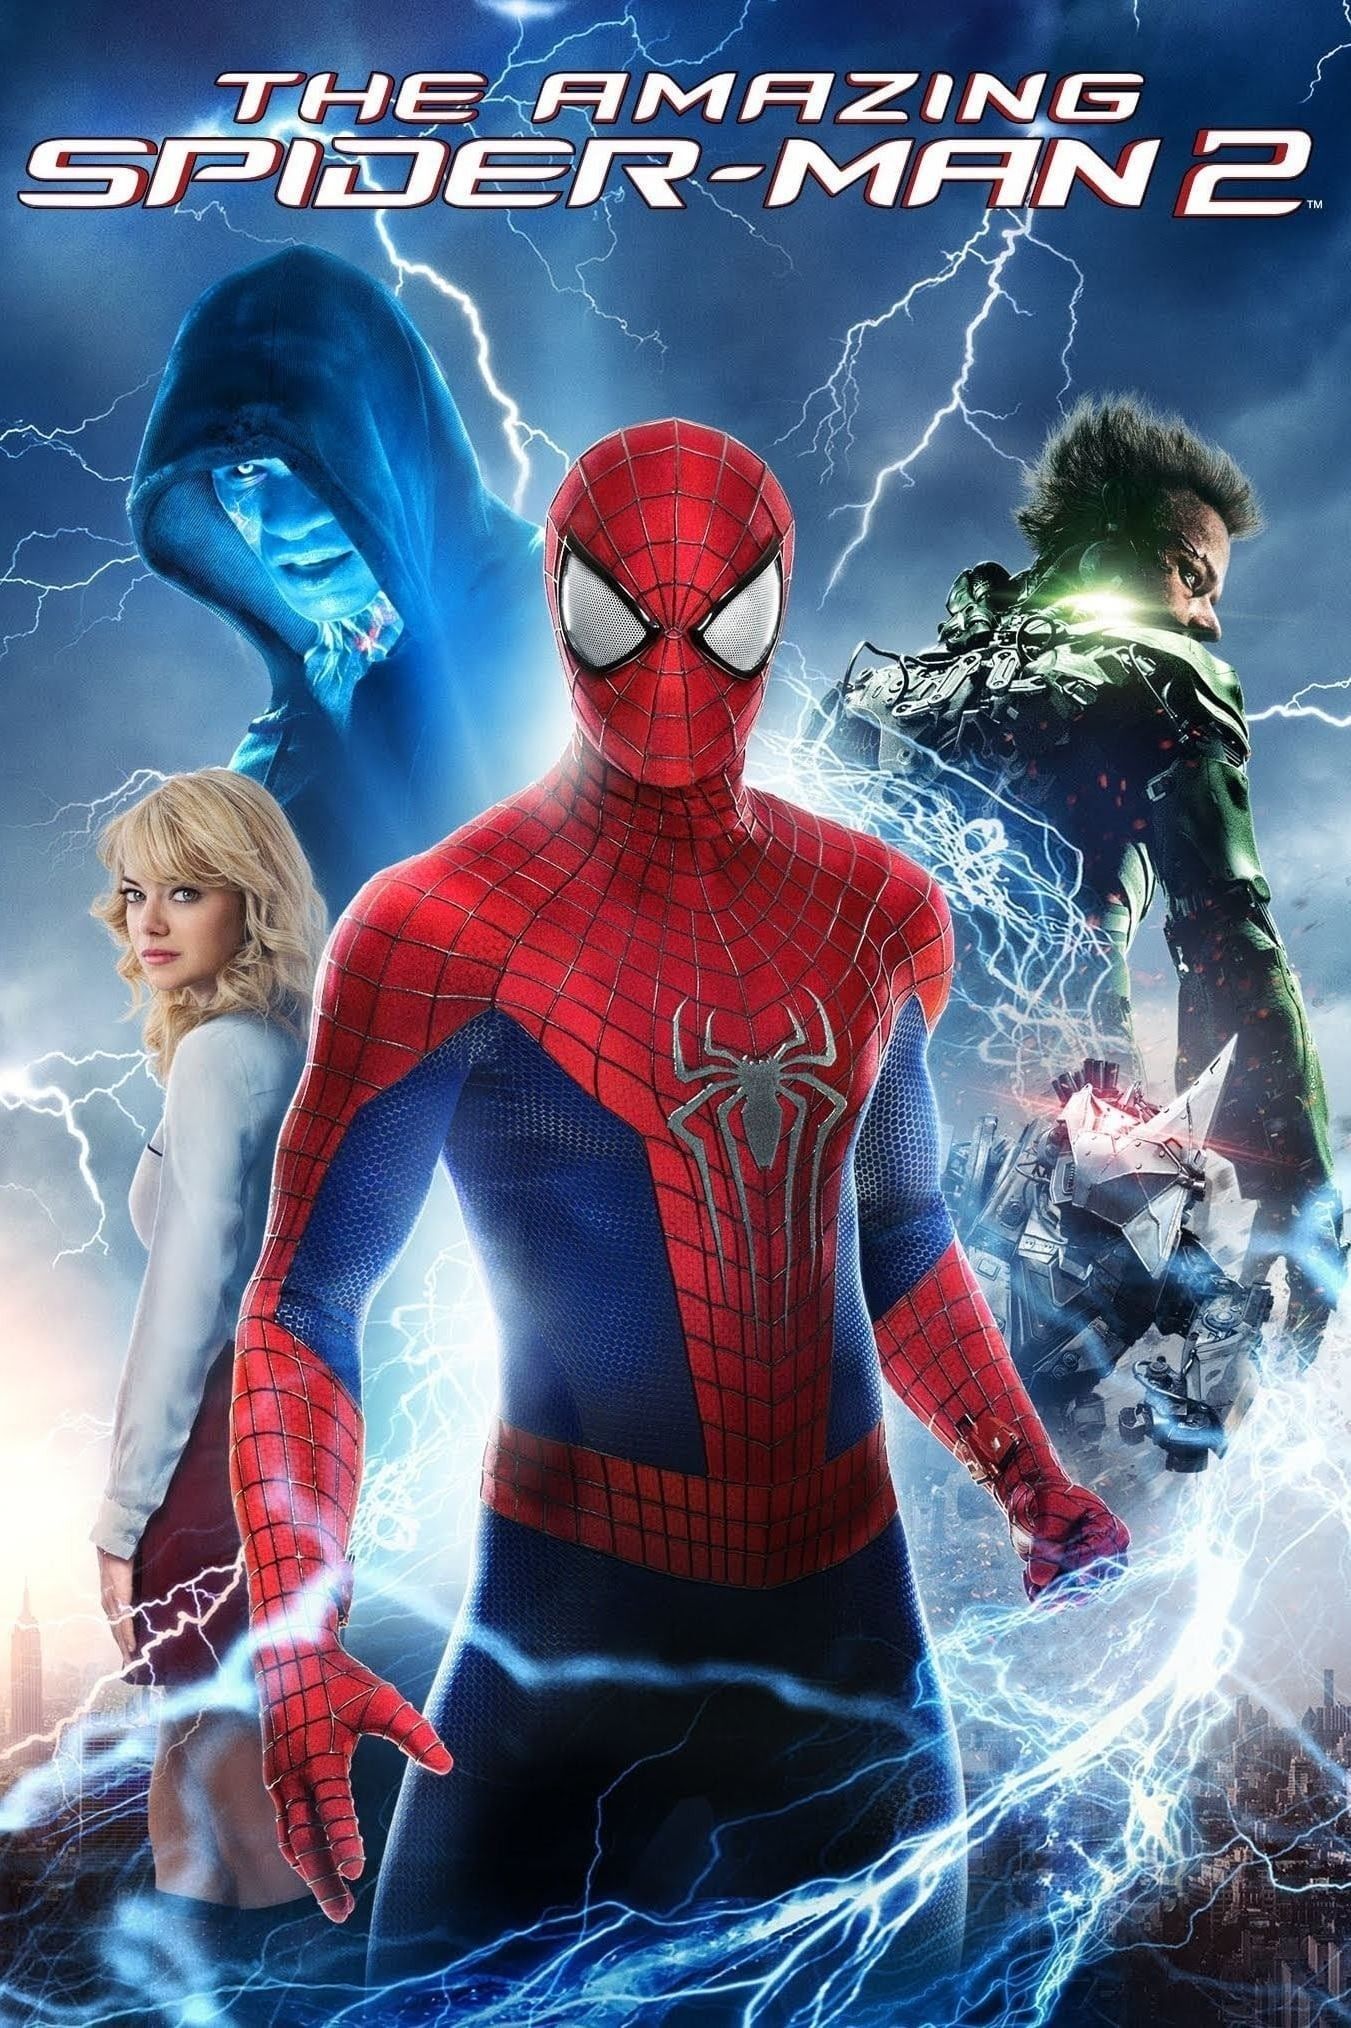 The Spider-Man movies ranked